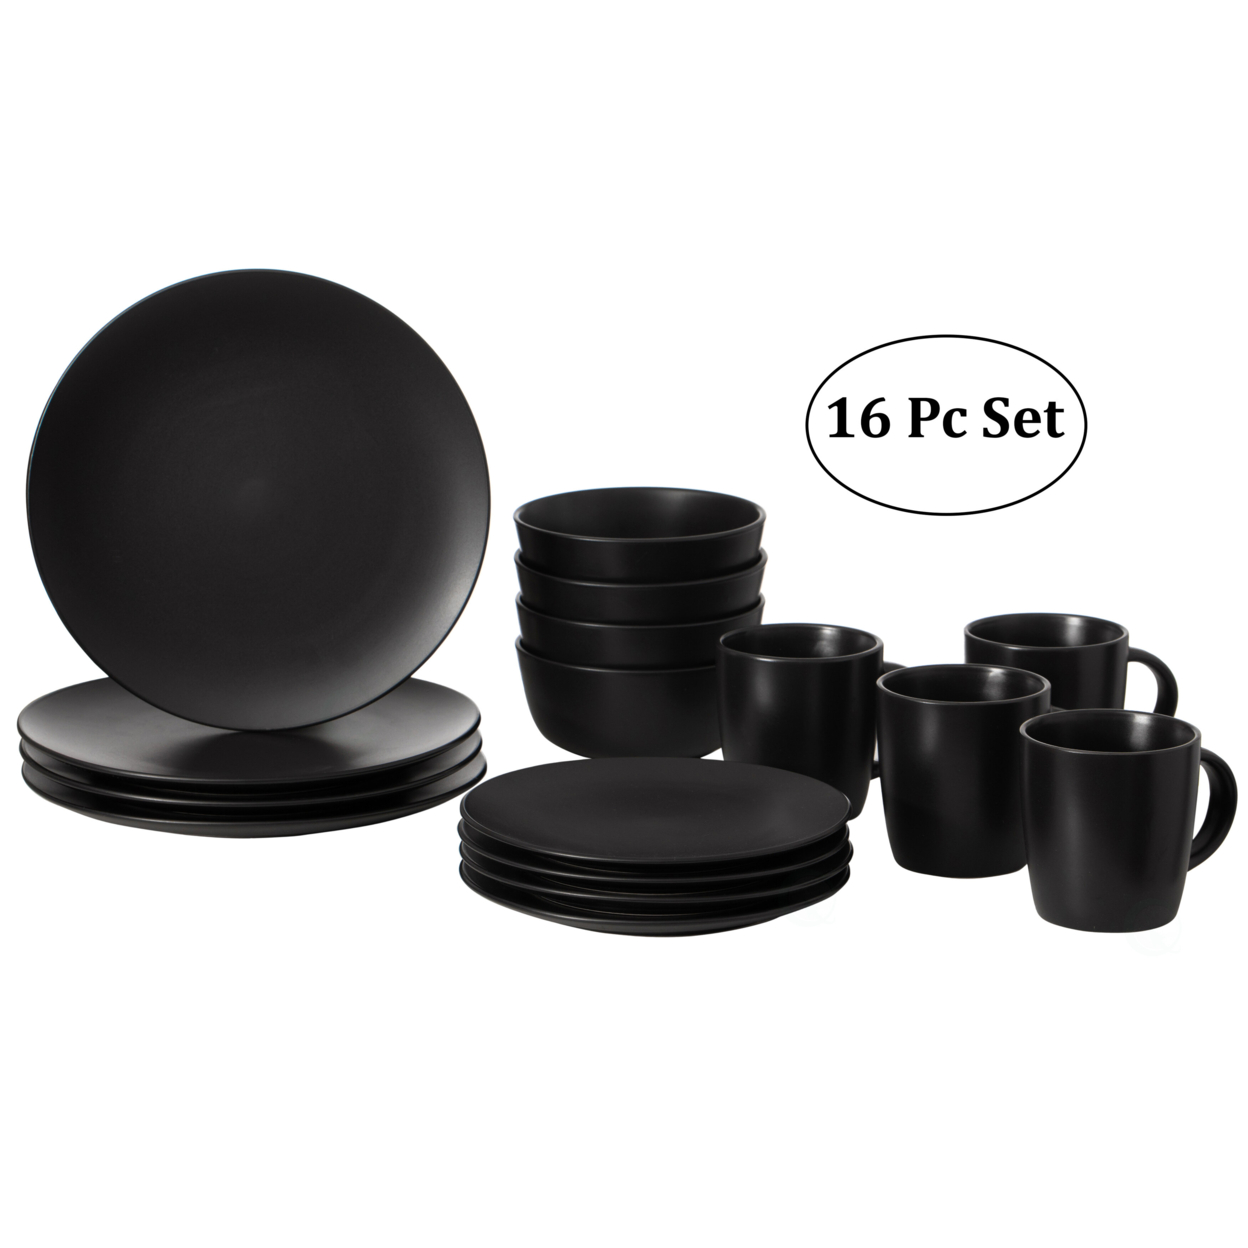 16 PC Spin Wash Dinnerware Dish Set For 4 Person Mugs, Salad And Dinner Plates And Bowls Sets, Dishwasher And Microwave Safe - Black